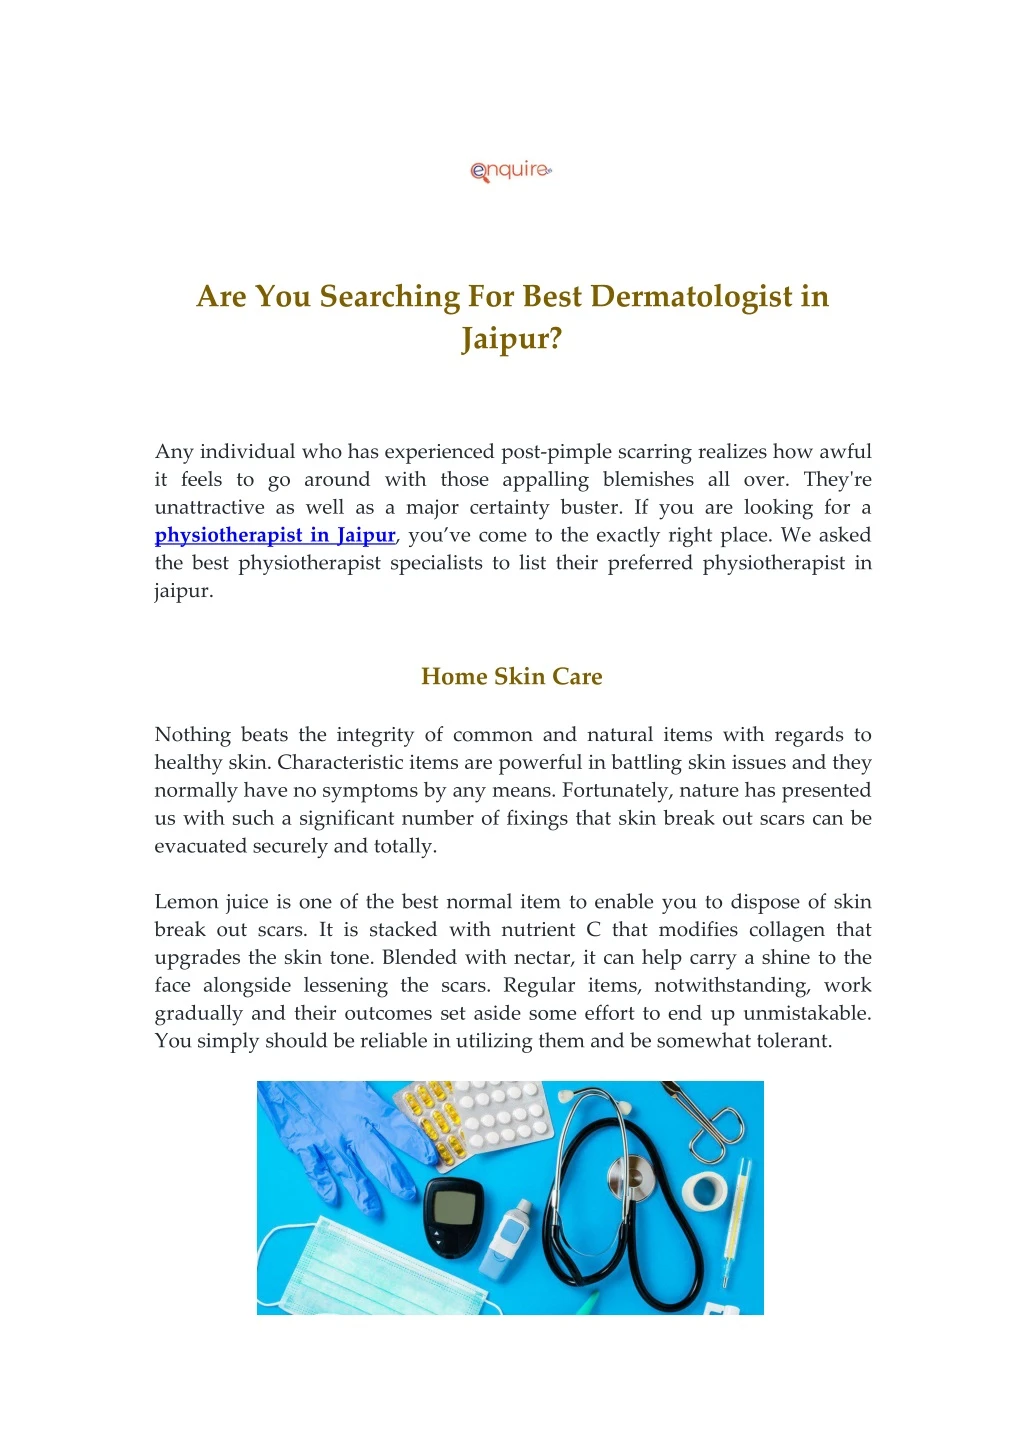 are you searching for best dermatologist in jaipur